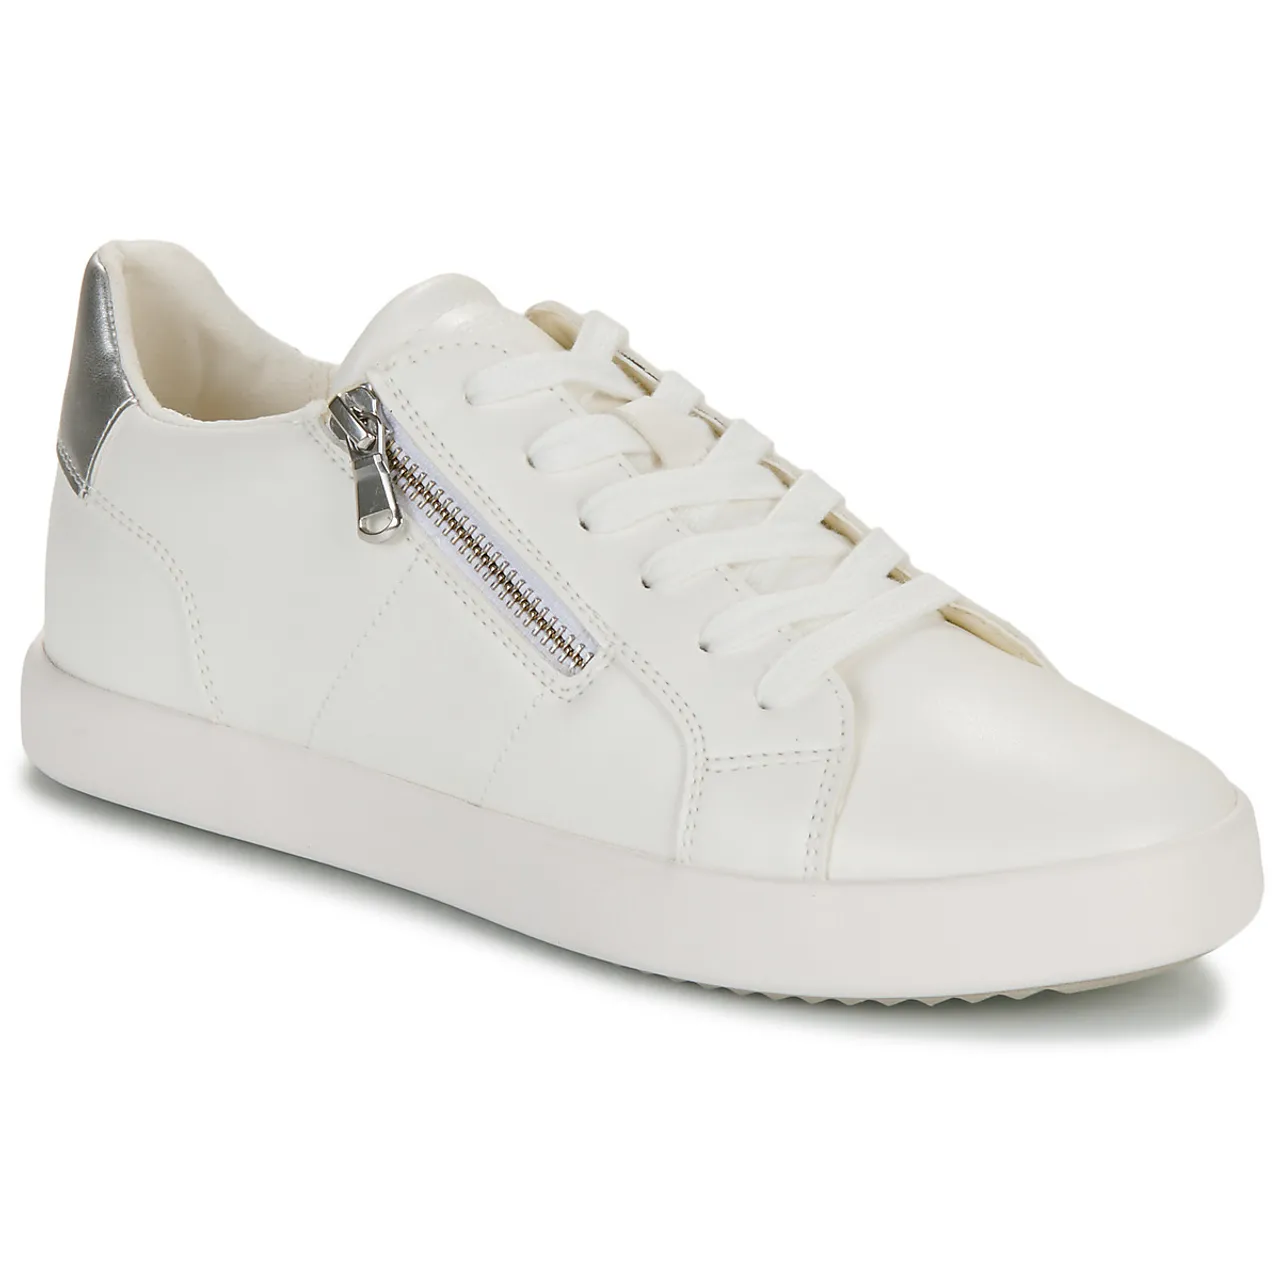 Geox  D BLOMIEE  women's Shoes (Trainers) in White